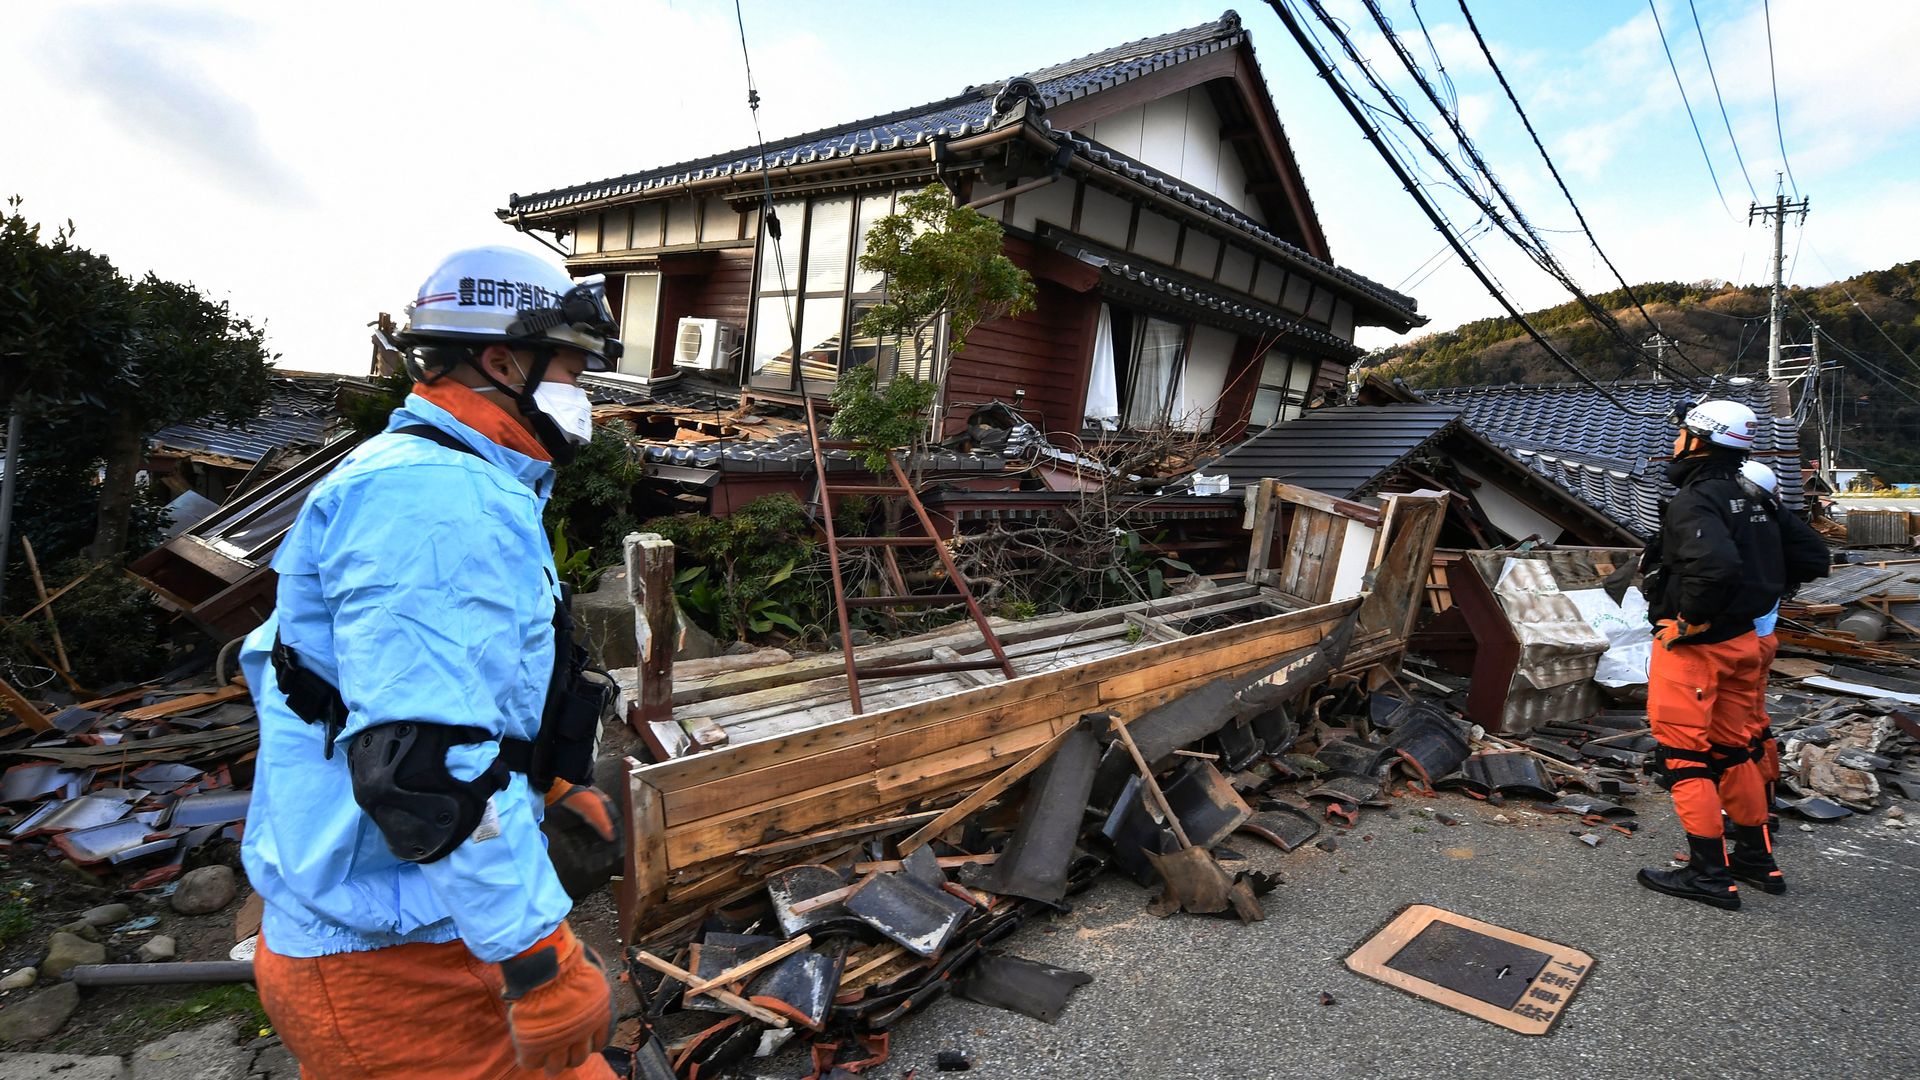  Firefighters inspect collapsed wooden houses in Wajima, Ishikawa prefecture on January 2, 2024, a day after a major 7.5 magnitude earthquake struck the Noto region in Ishikawa prefecture in the afternoon. 